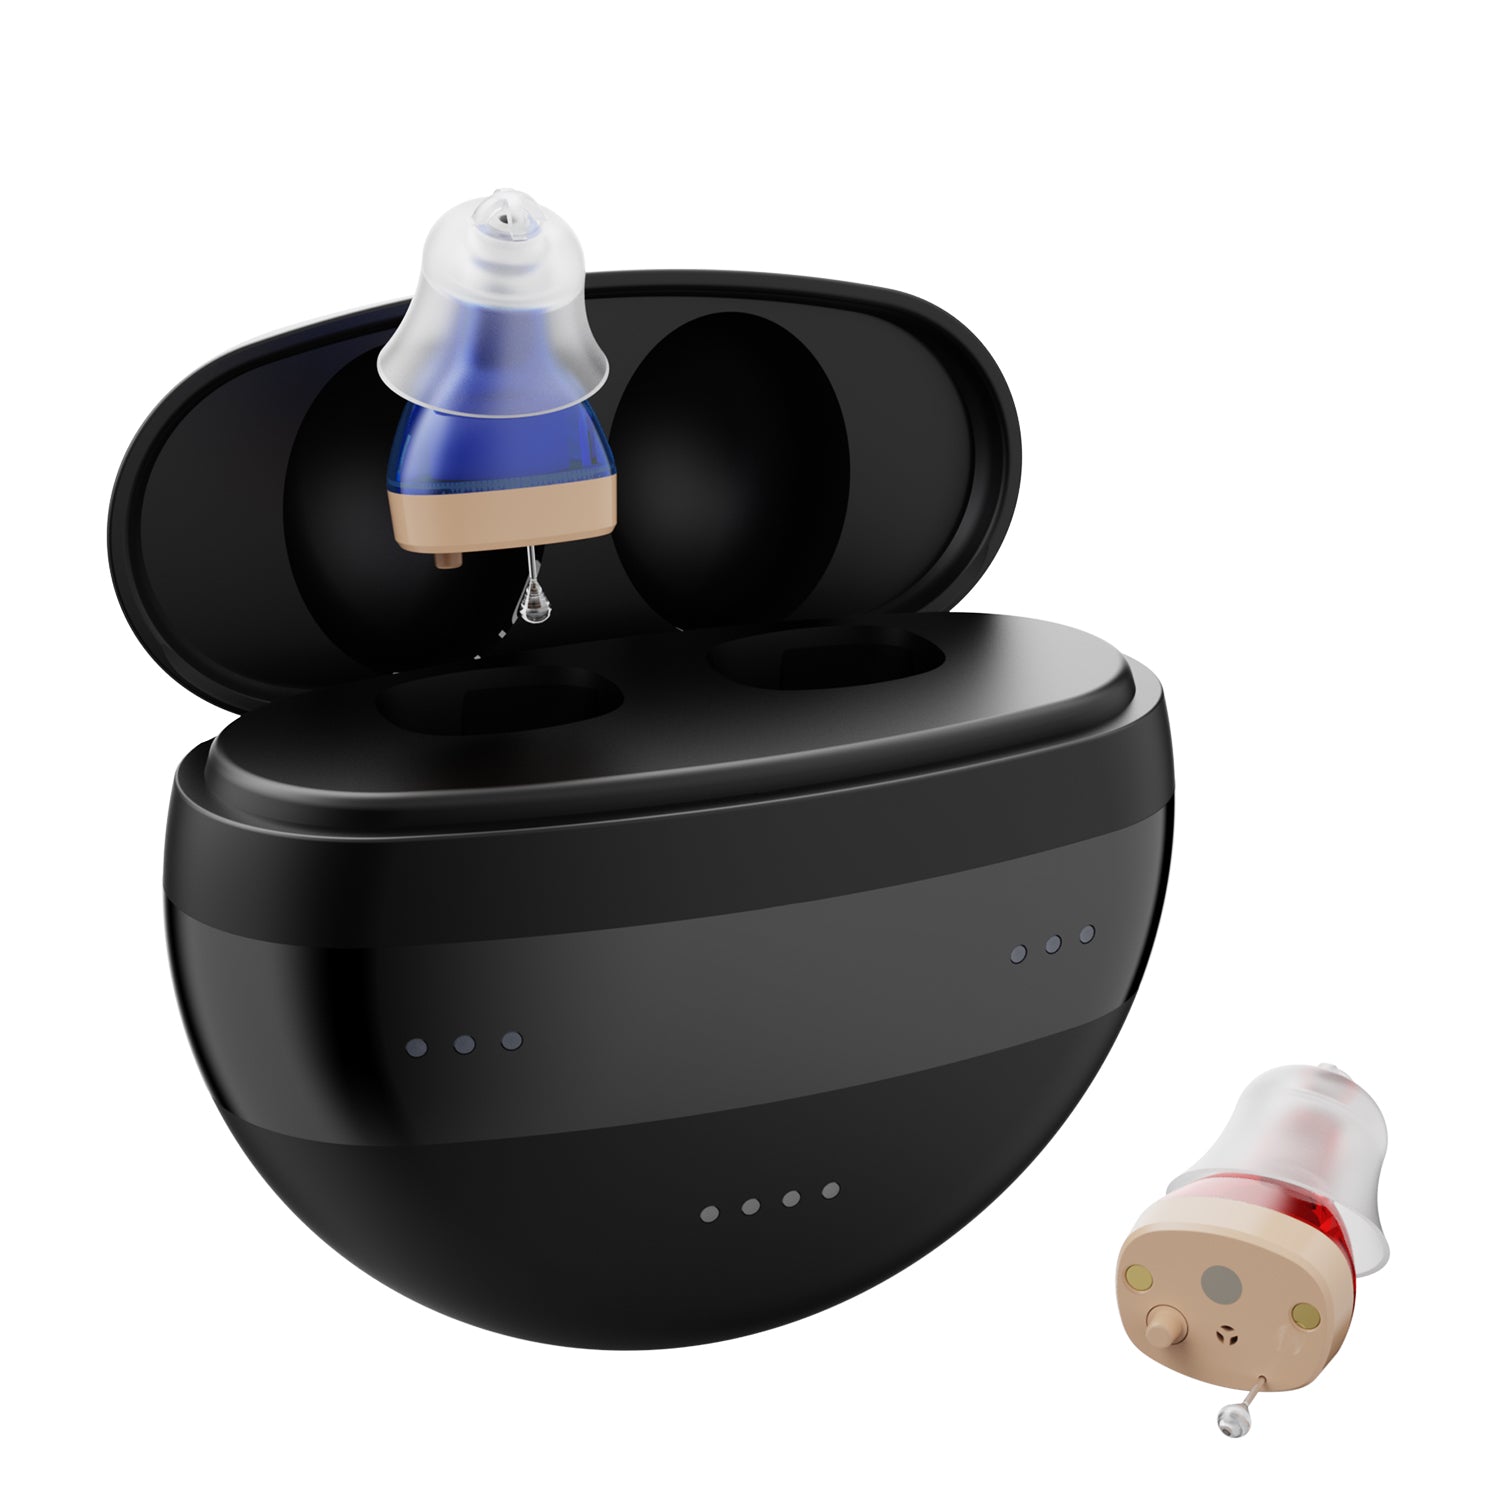 Soundbright Mini in-the-ear open charging case with one hearing aid removed